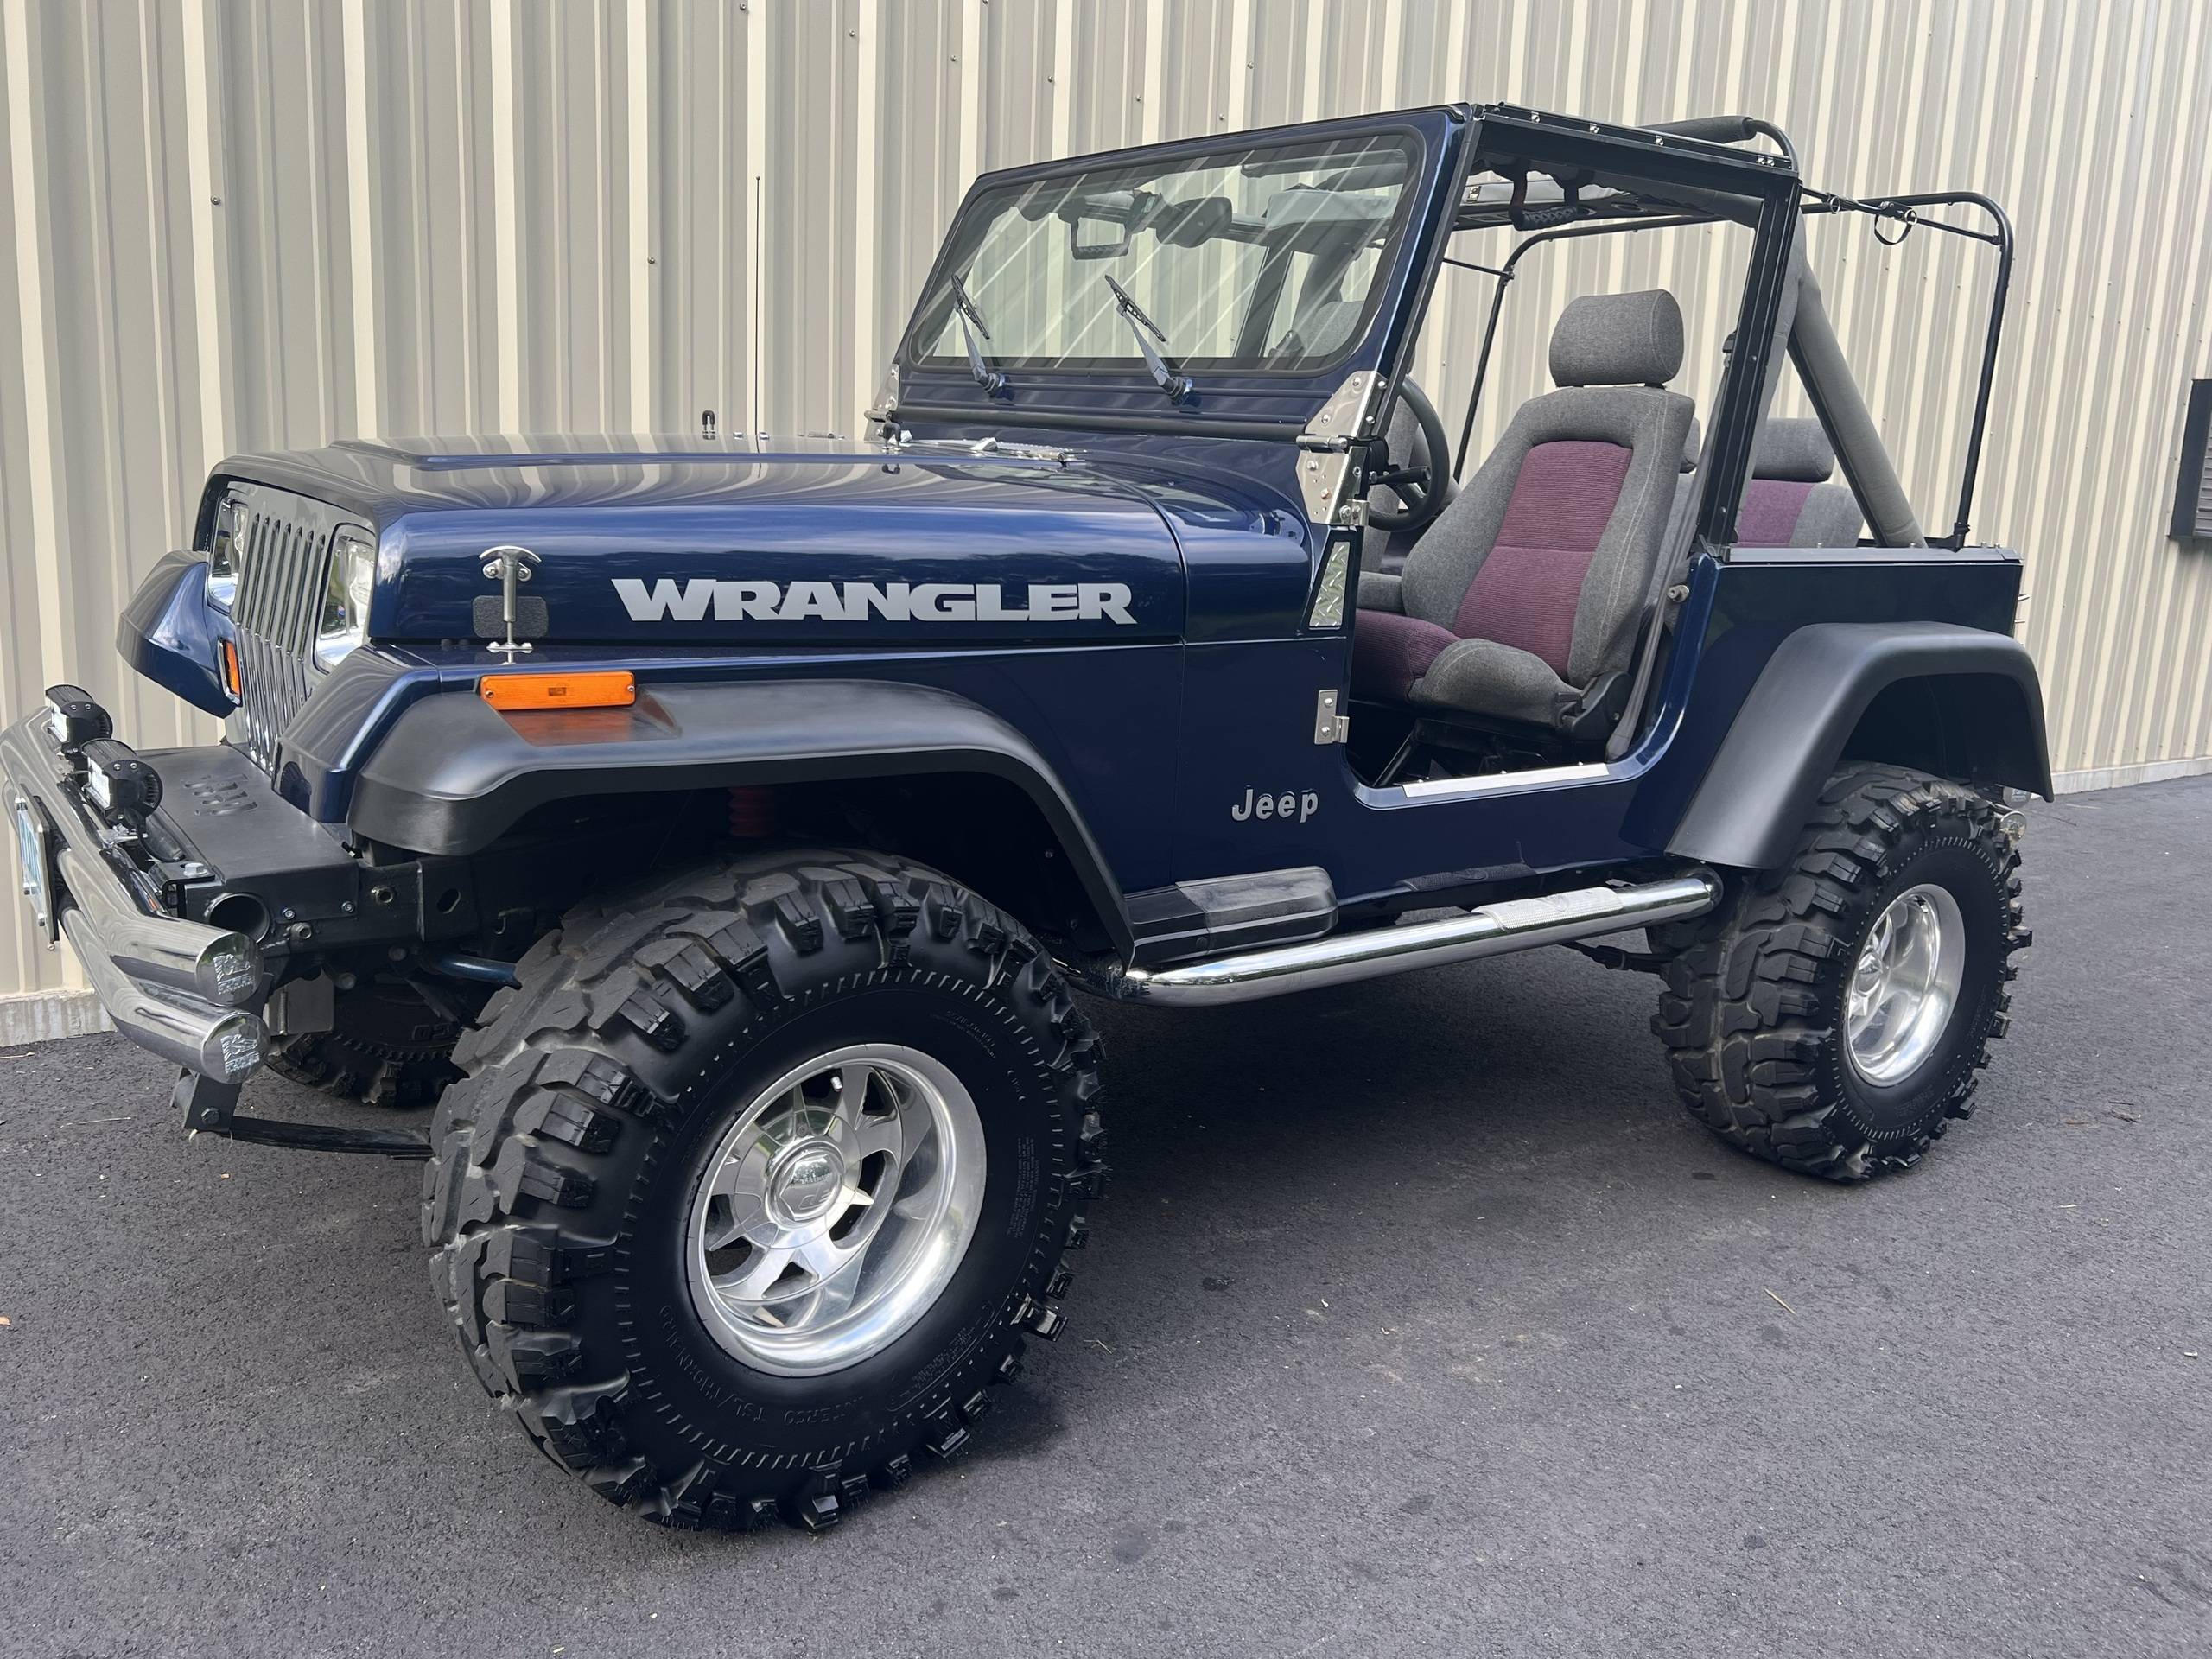 1989 Jeep Wrangler Supercharged 14